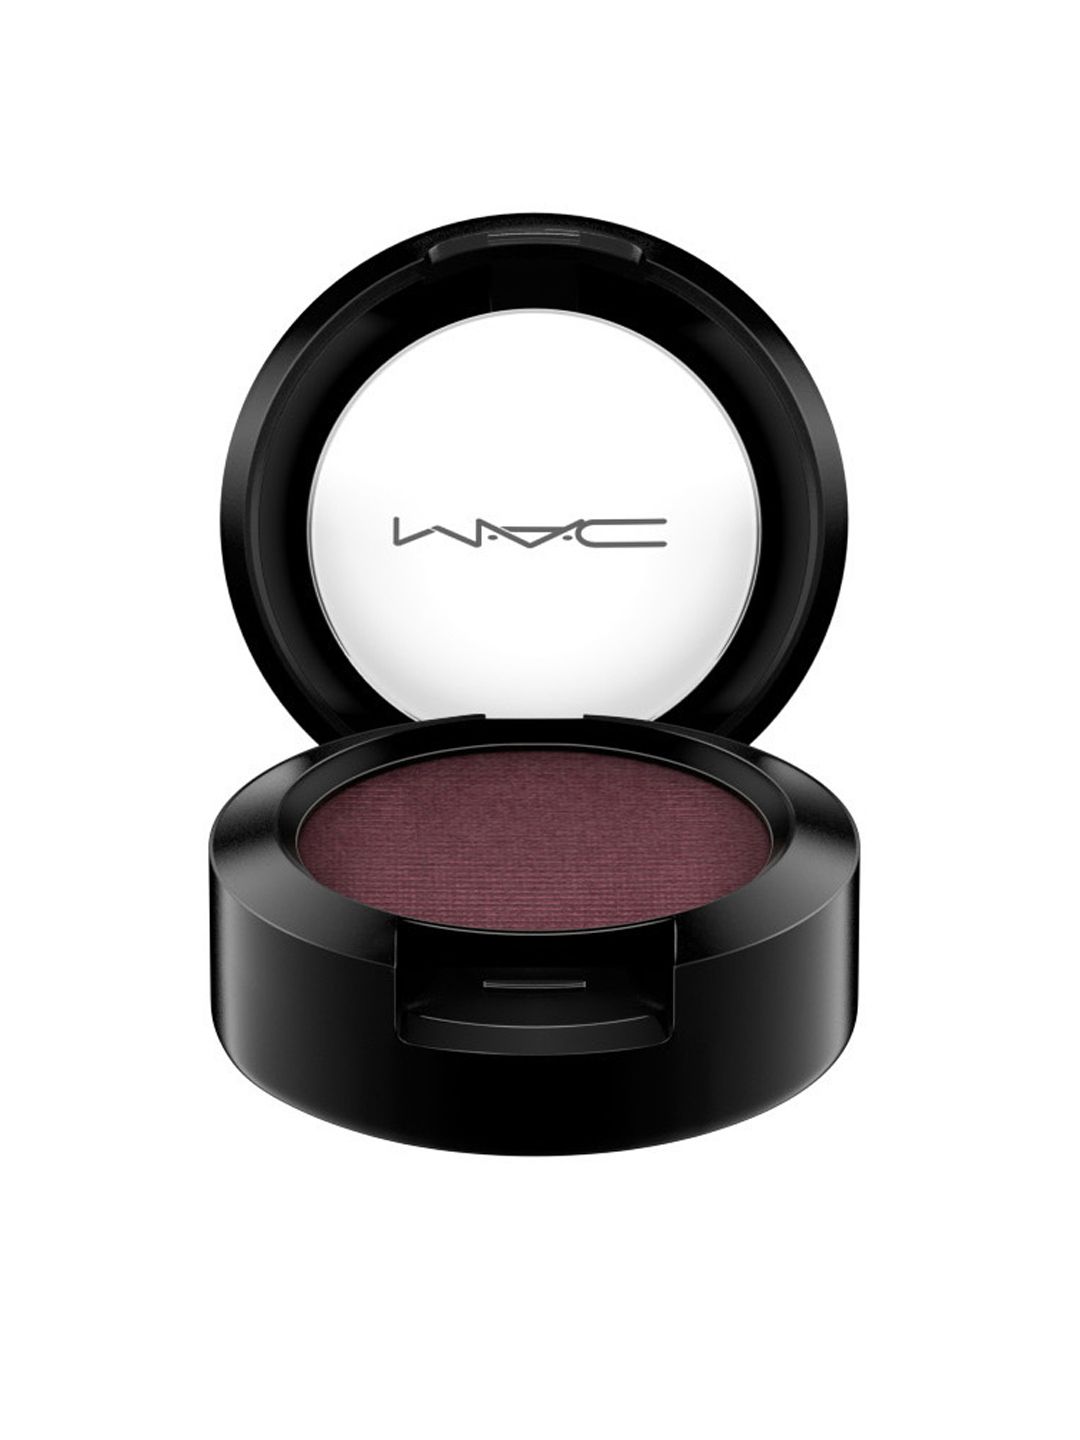 M.A.C Eye Shadow - Sketch 1.5g Price in India